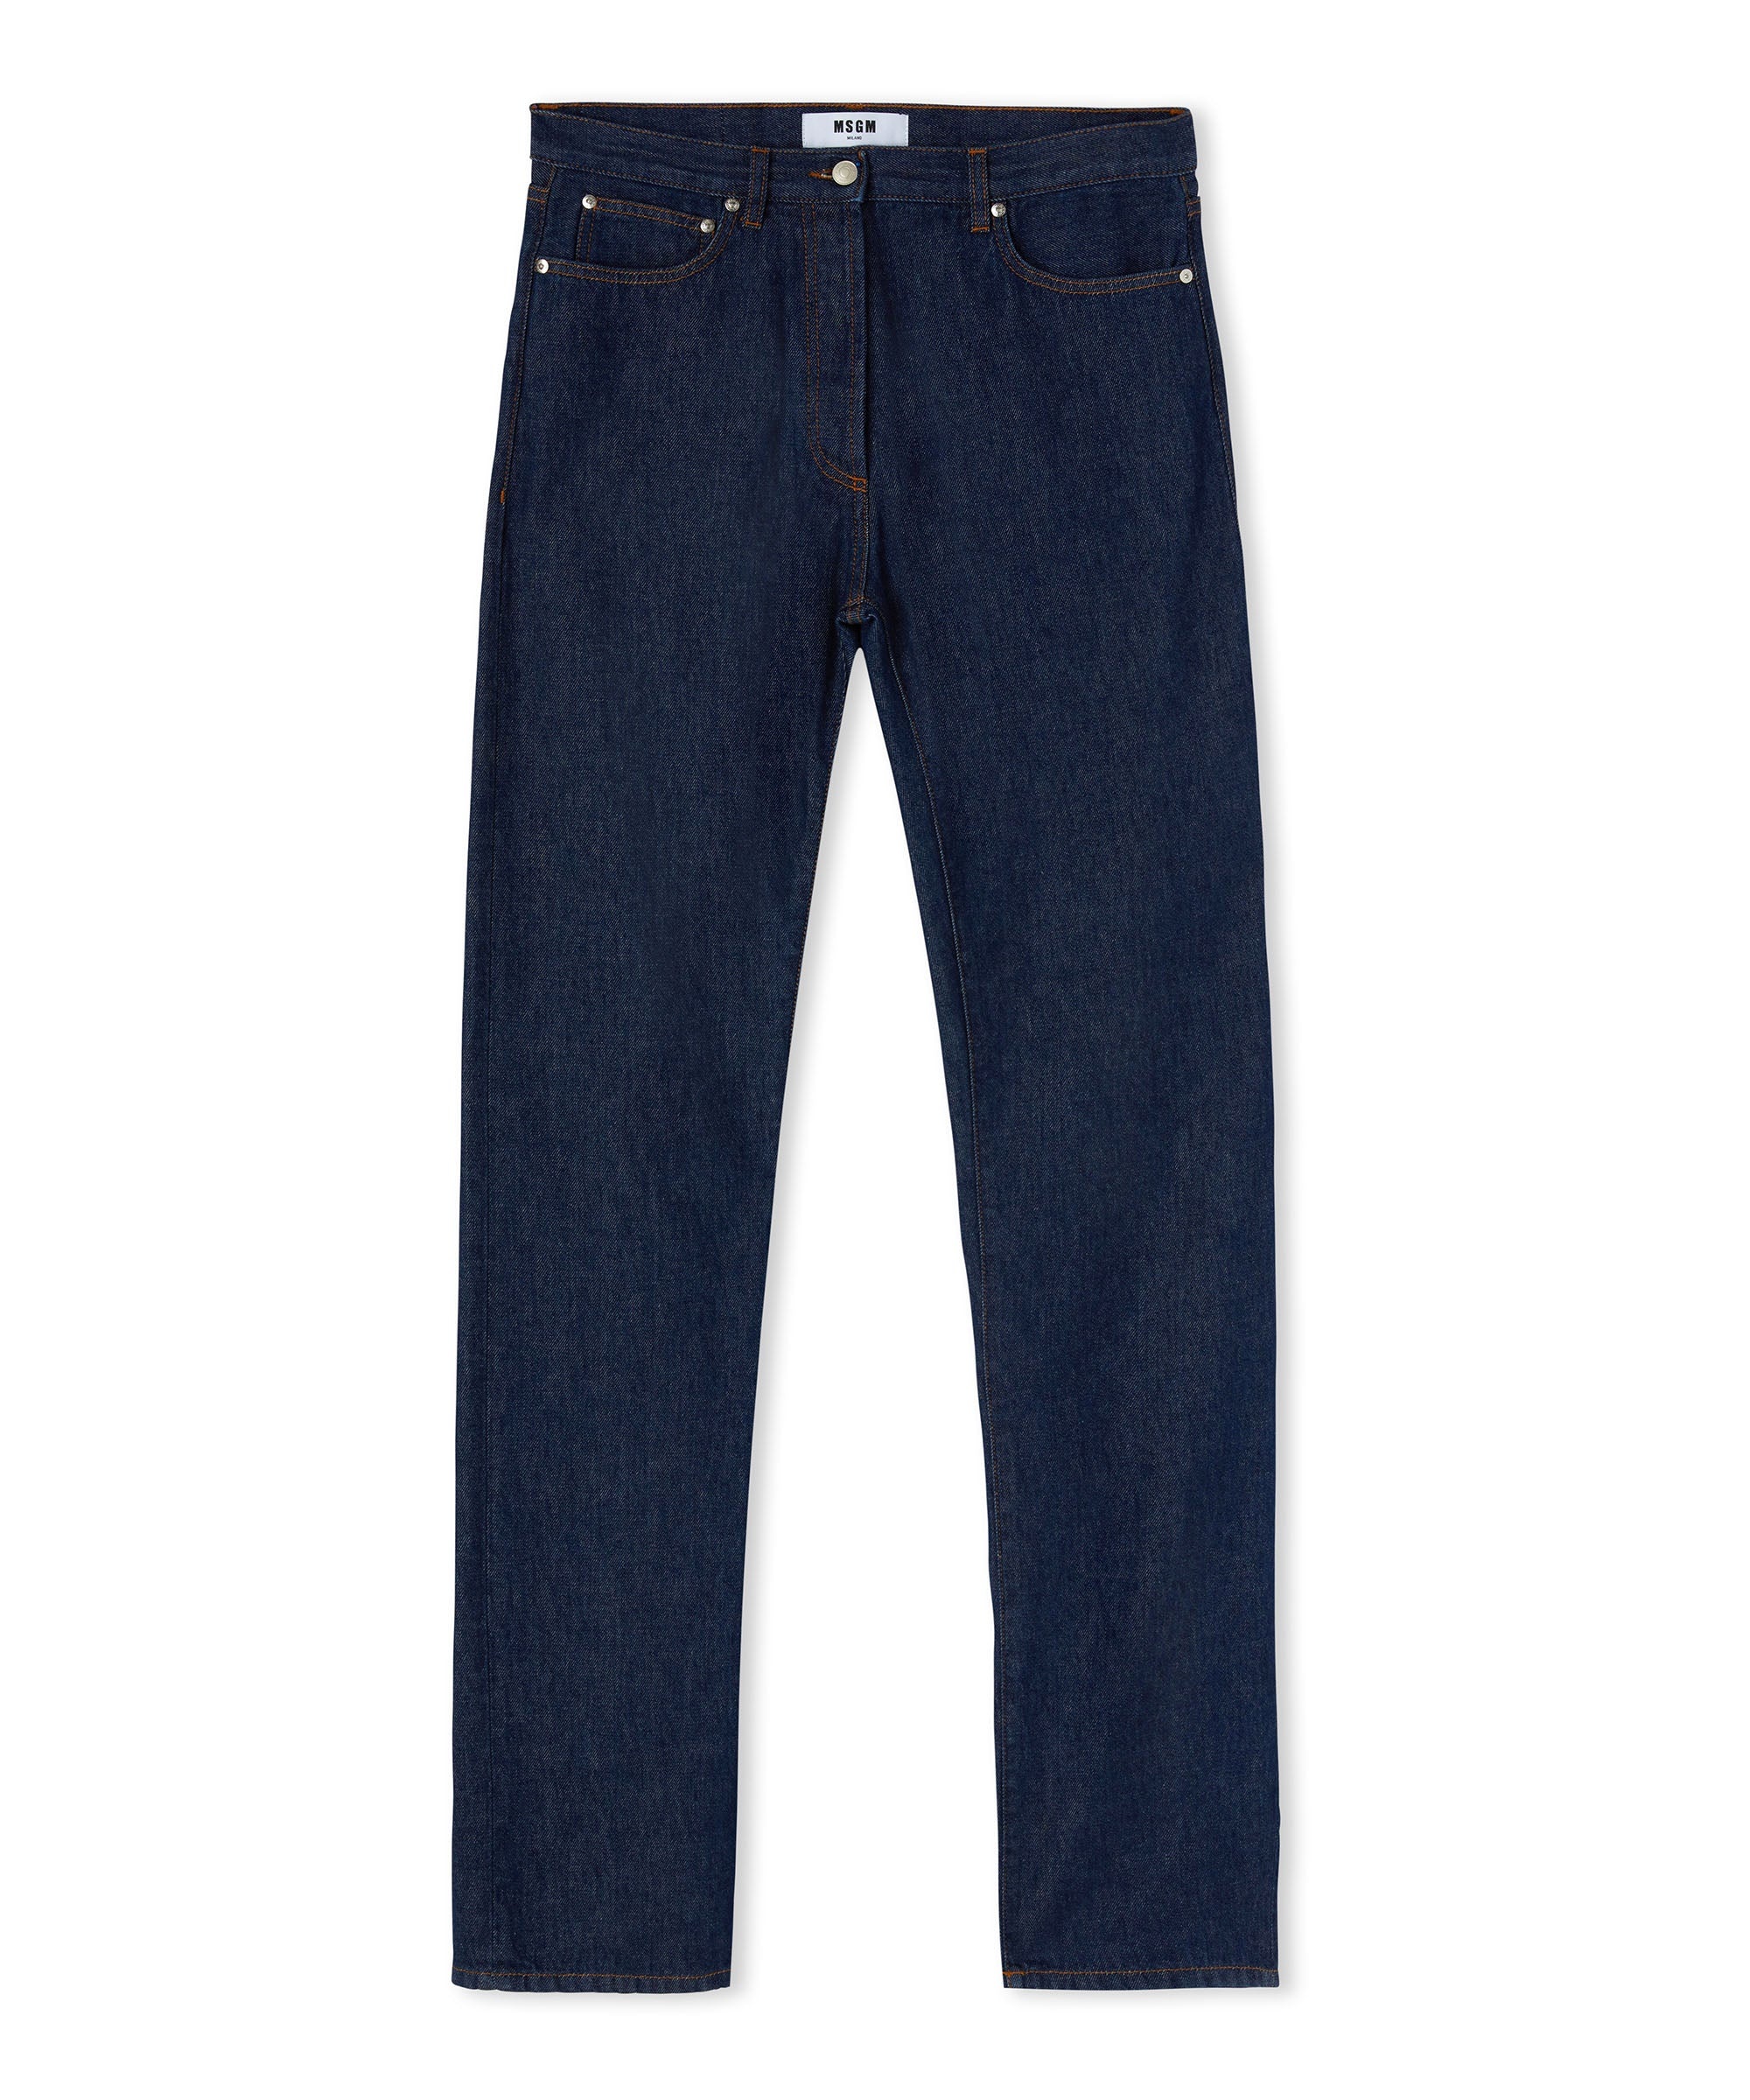 Solid color tailored jeans with straight legs - 2